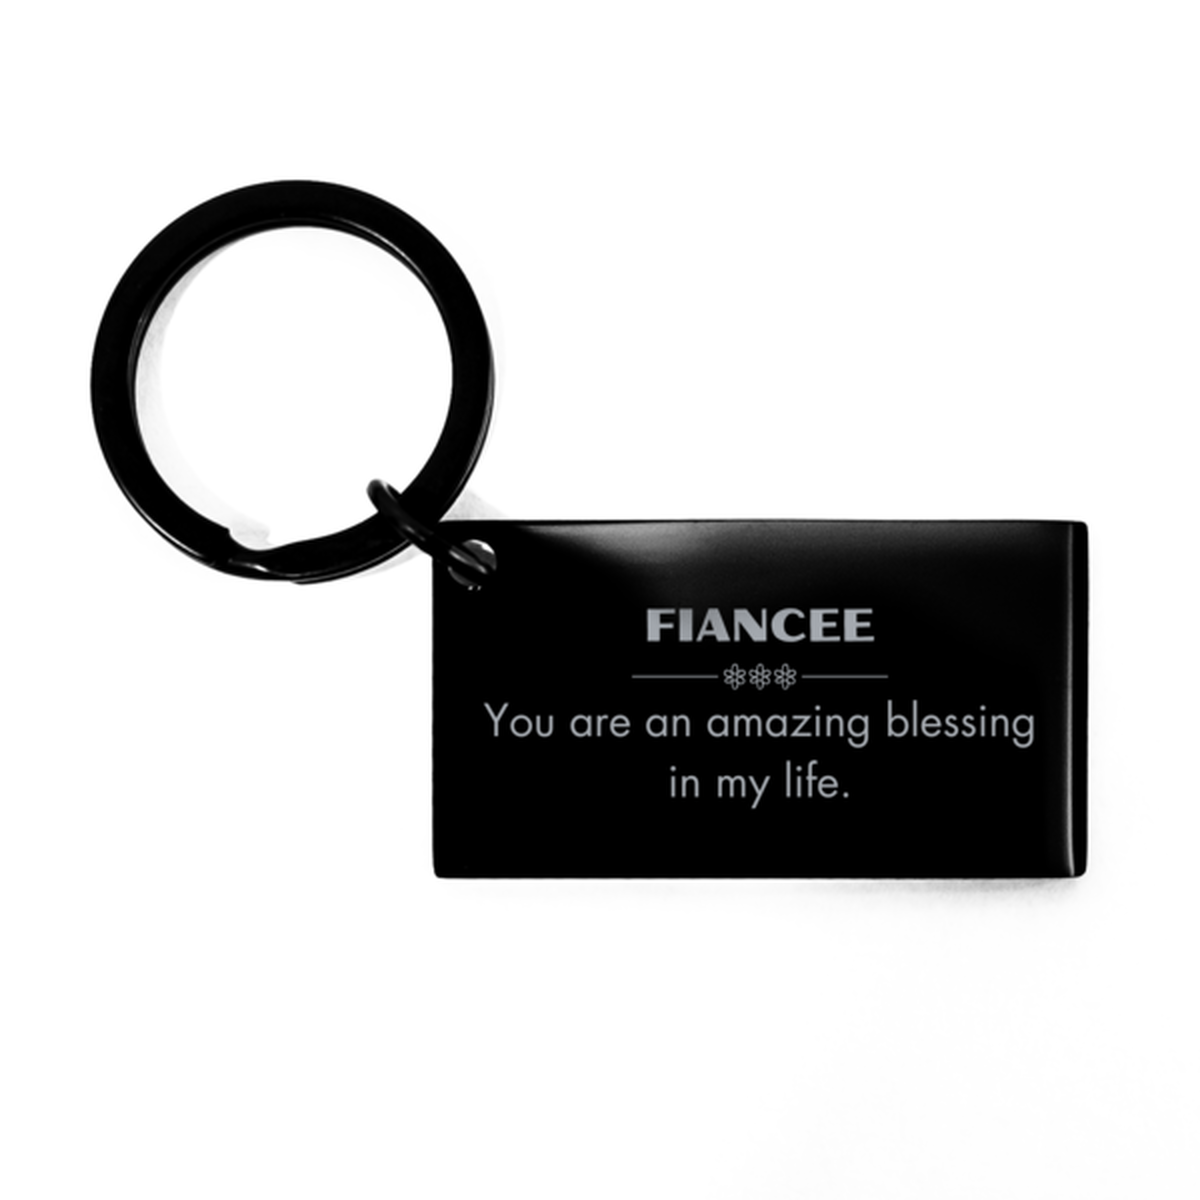 Fiancee Keychain, You are an amazing blessing in my life, Thank You Gifts For Fiancee, Inspirational Birthday Christmas Unique Gifts For Fiancee